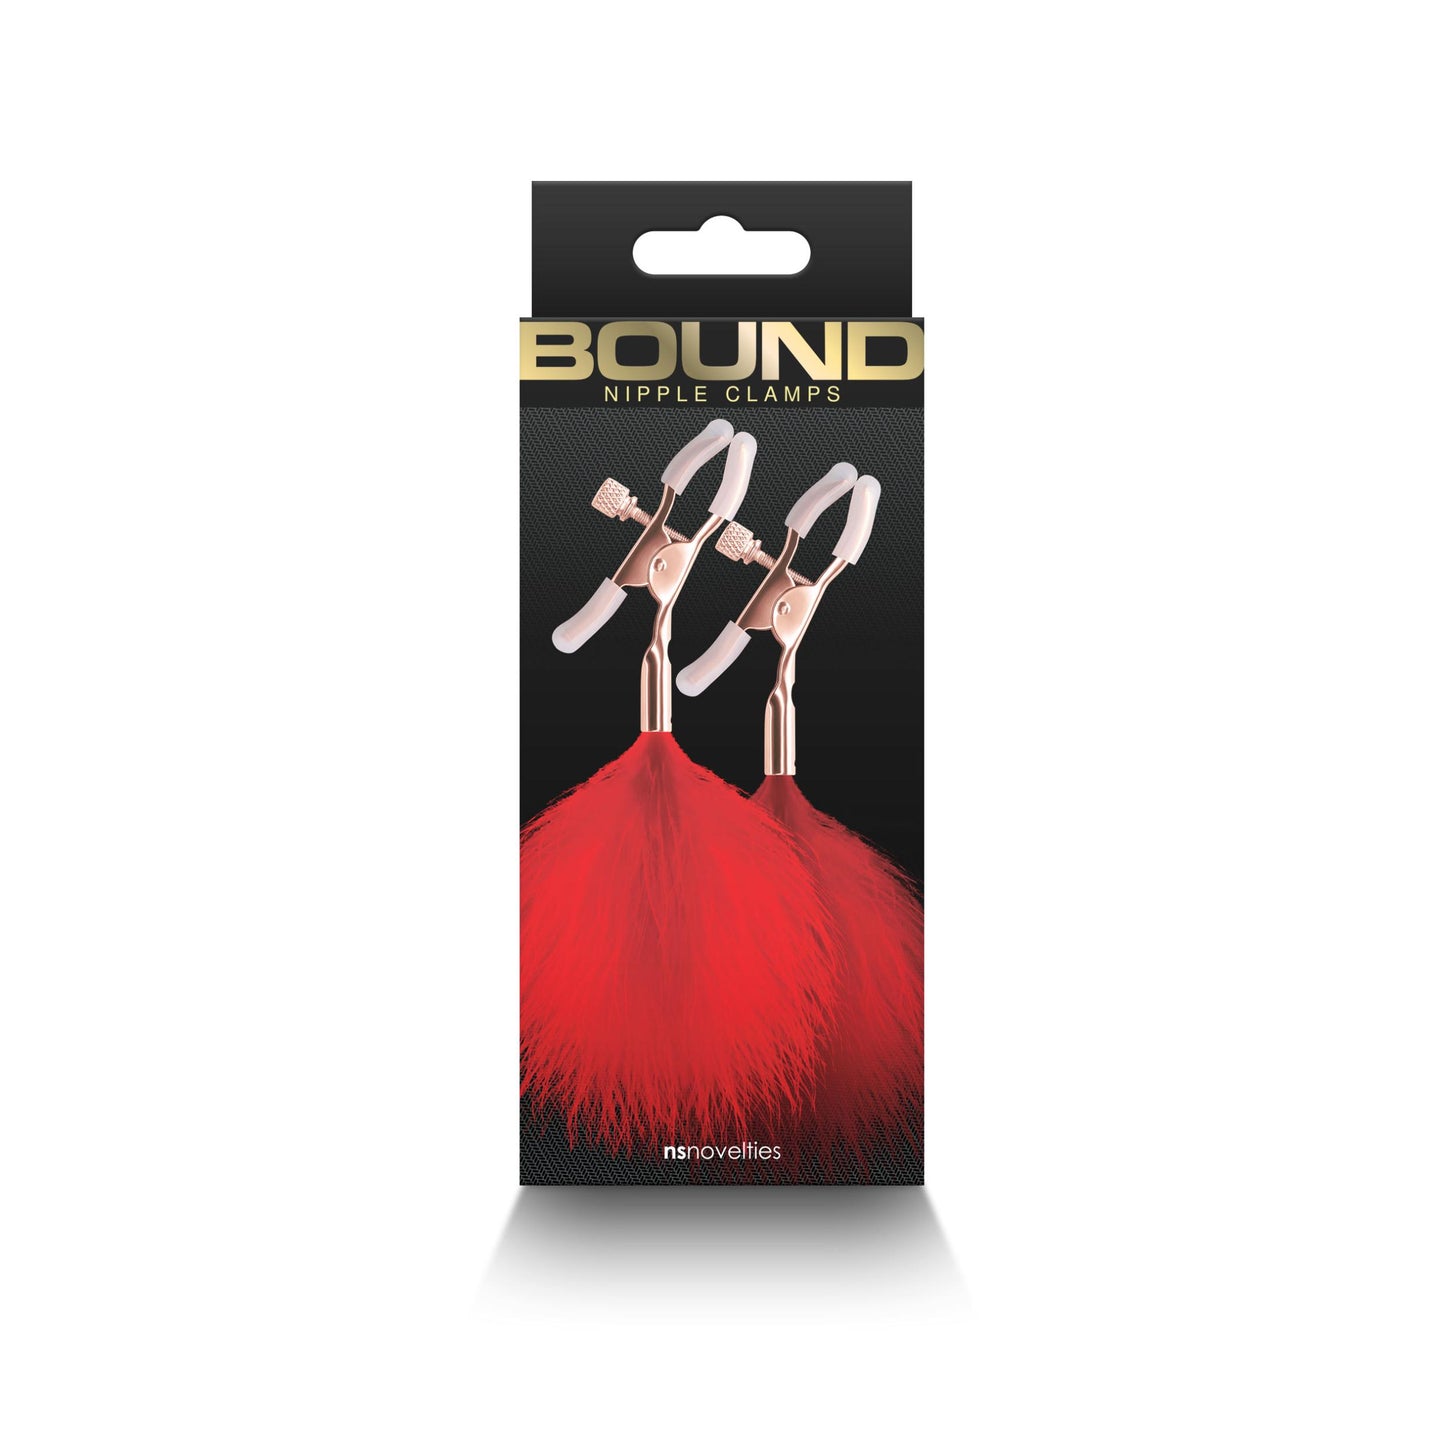 Bound - Nipple Clamps - F1 -